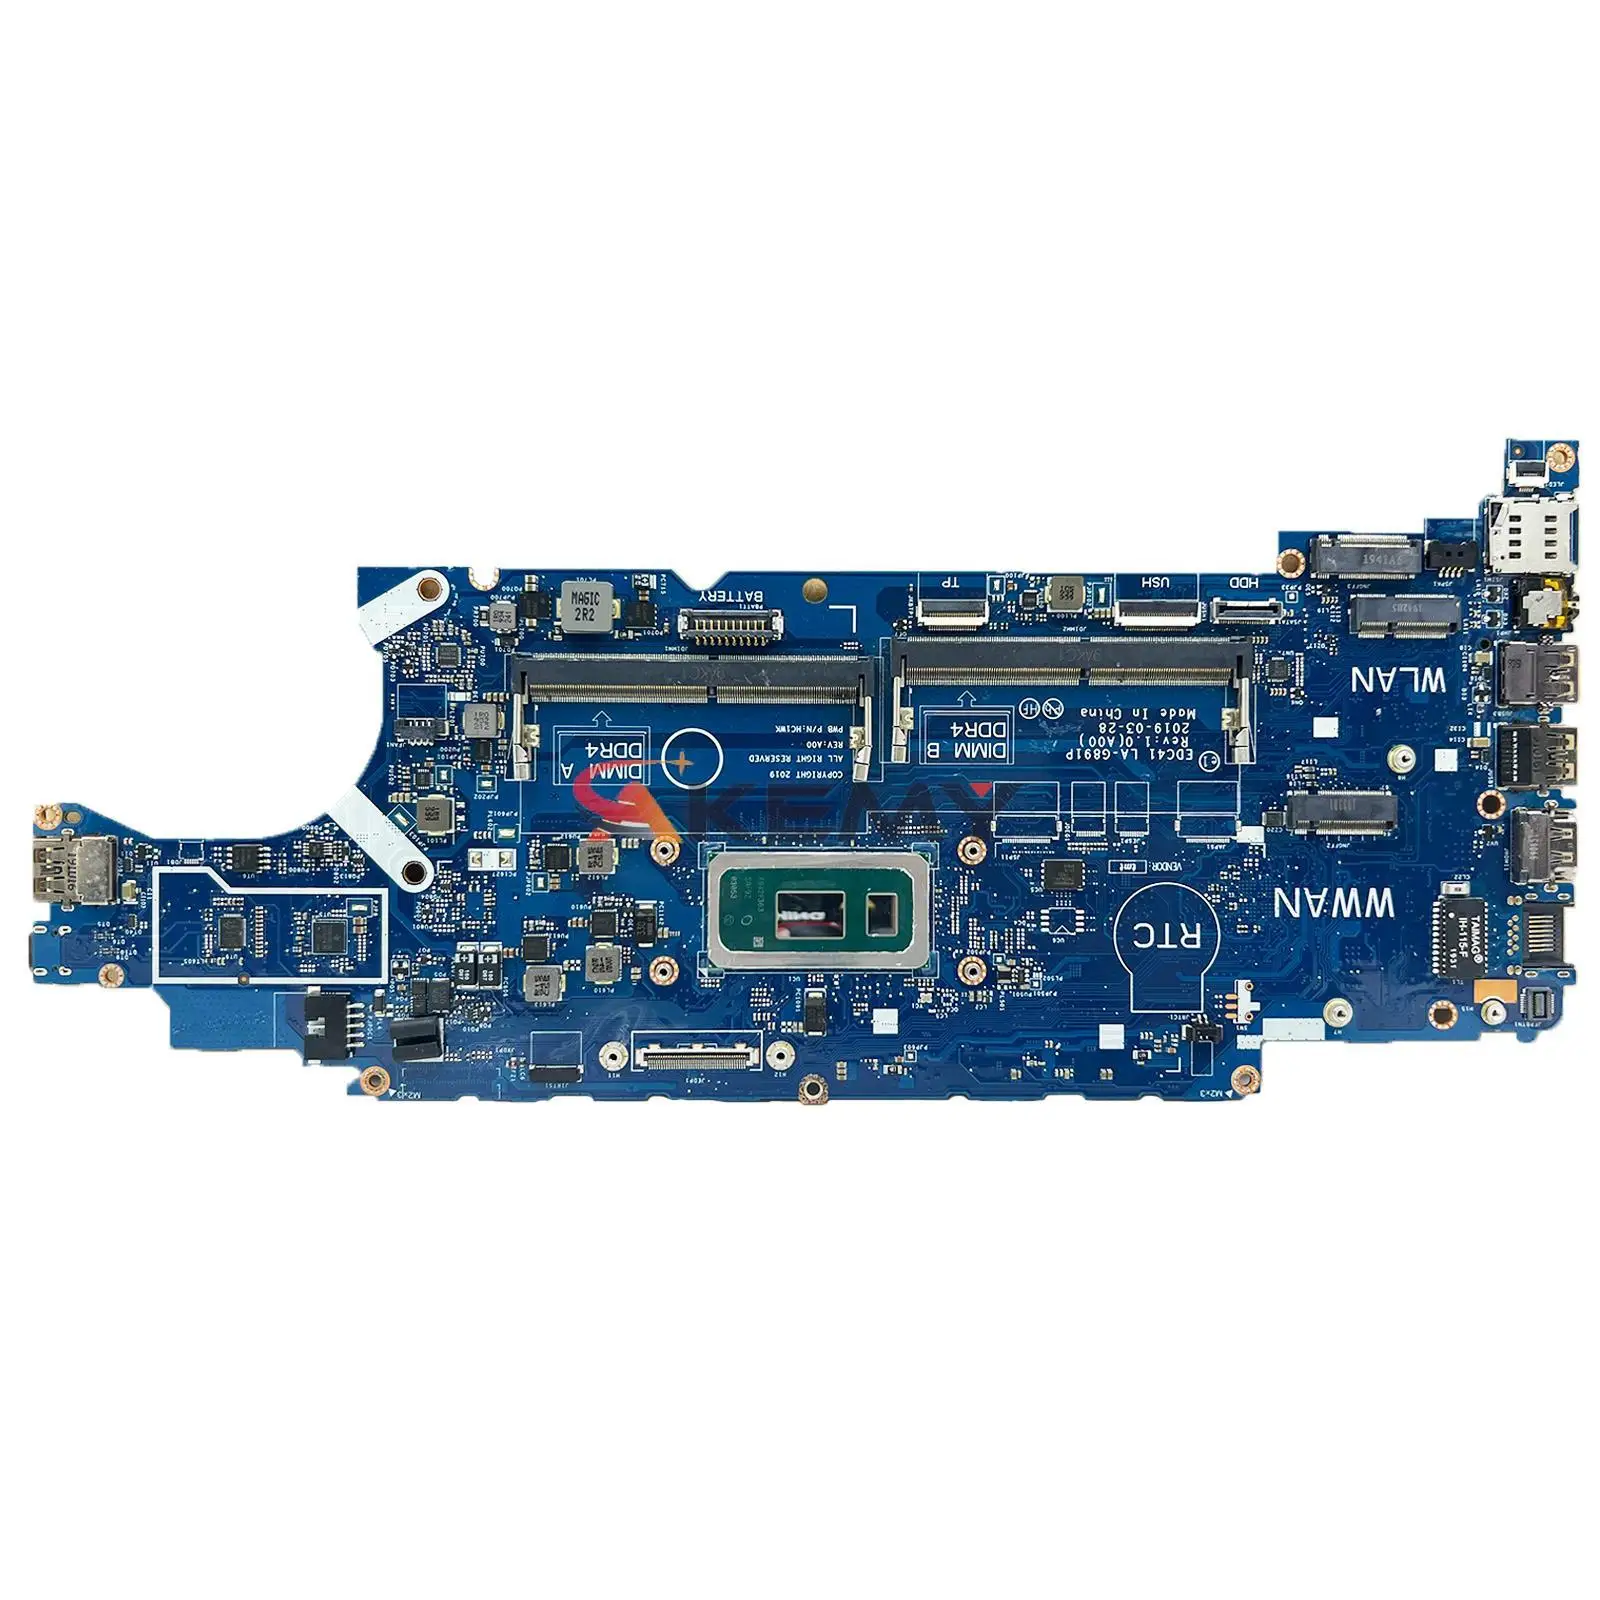 

LA-G891P i5/i7 8th Gen CPU Notebook Mainboard For Dell Latitude 5400 Laptop Motherboard CN-052T0R 0HJD1J 100% well working